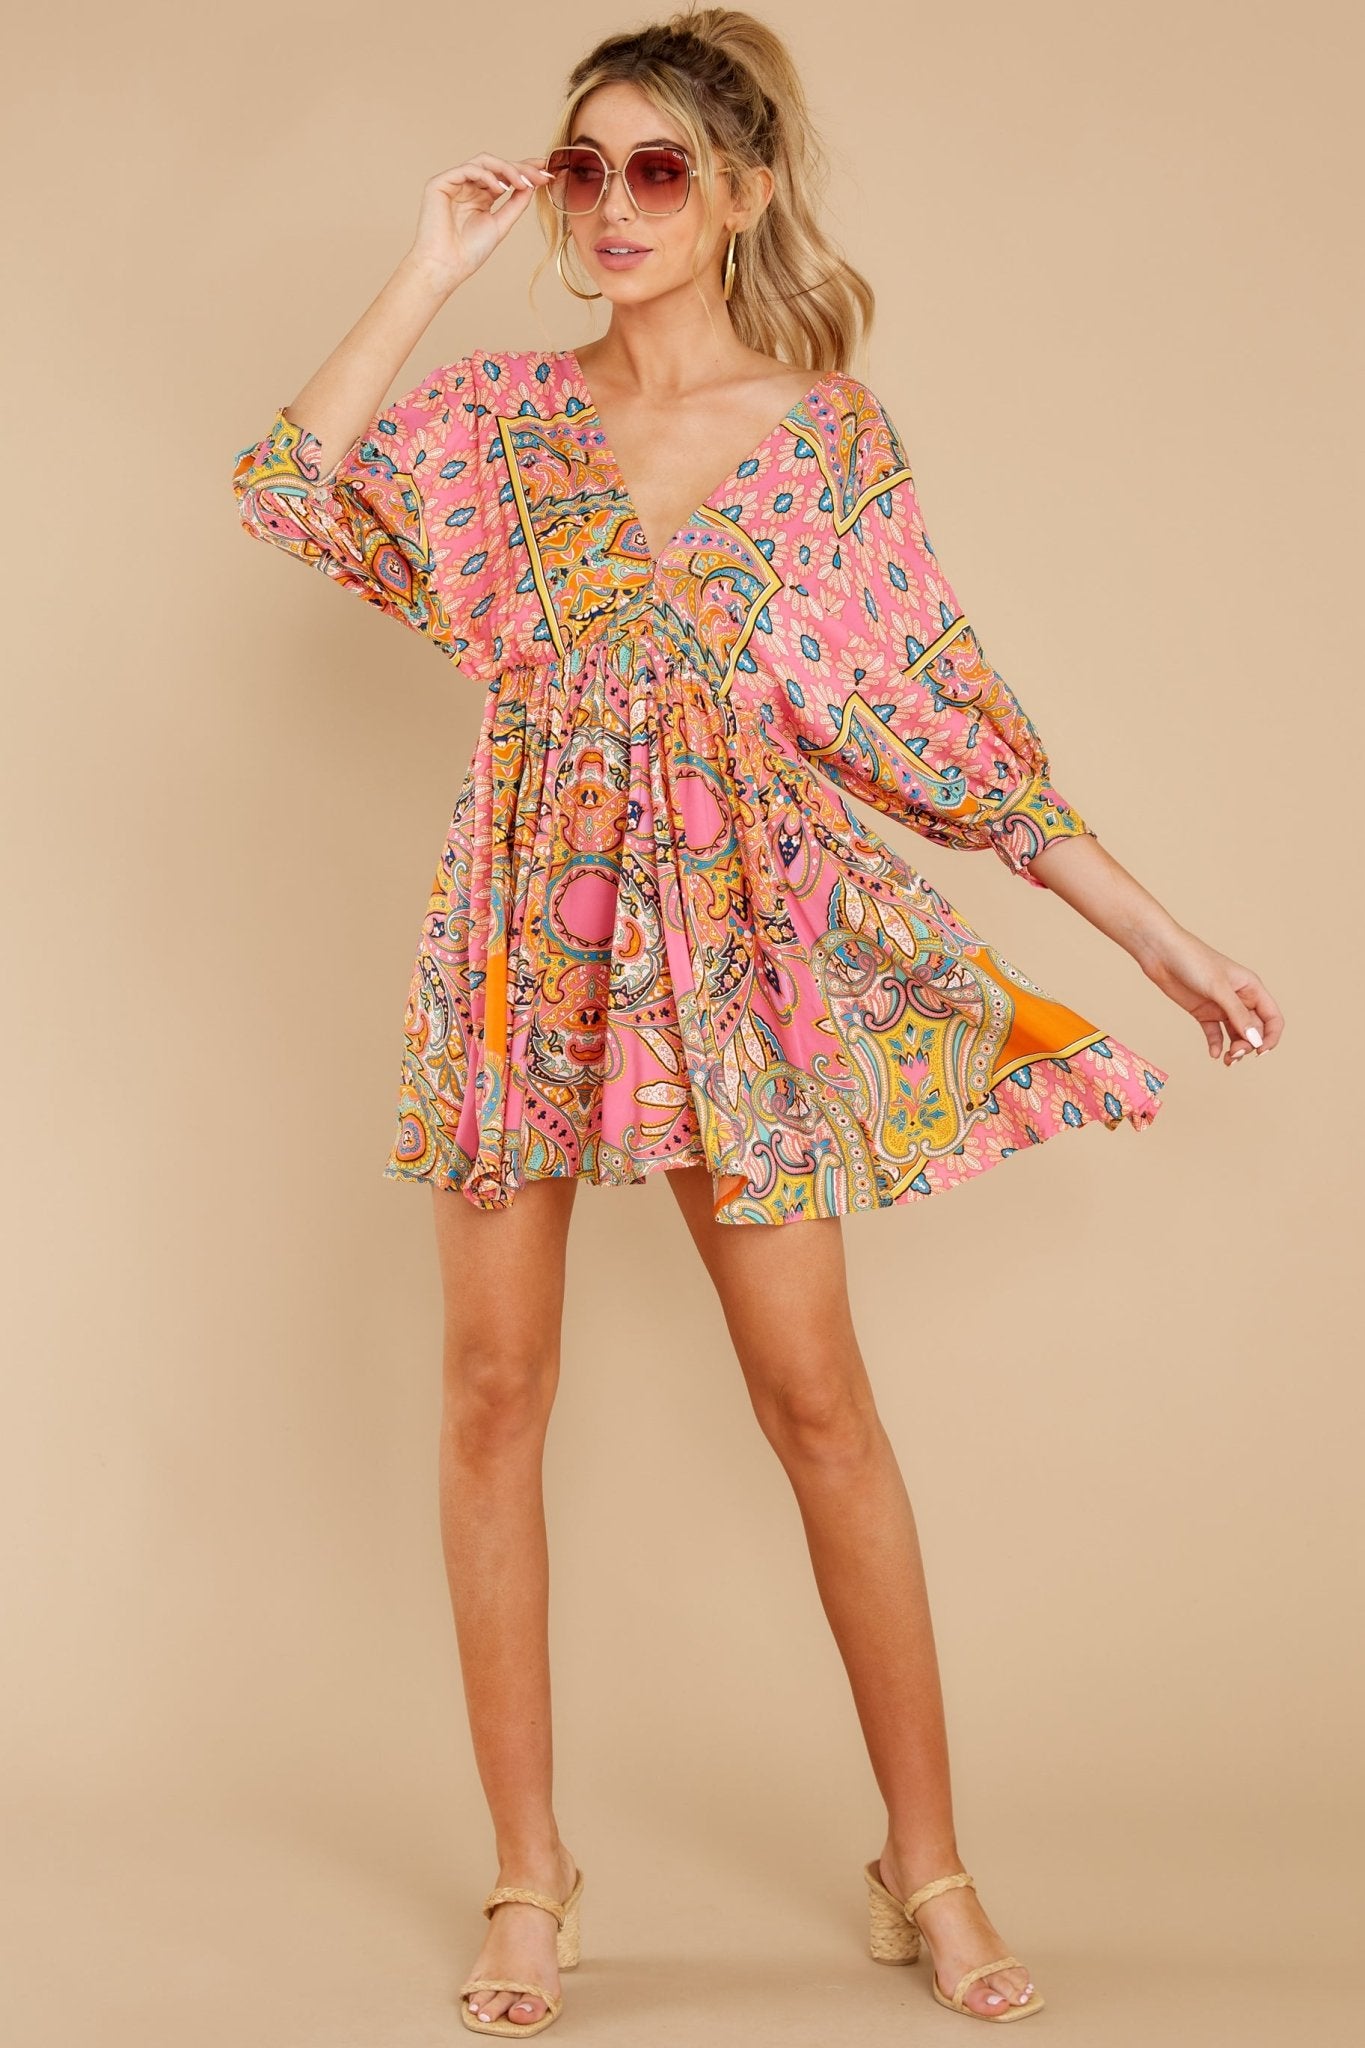 Here's To The Chase Pink Multi Print Dress - Red Dress